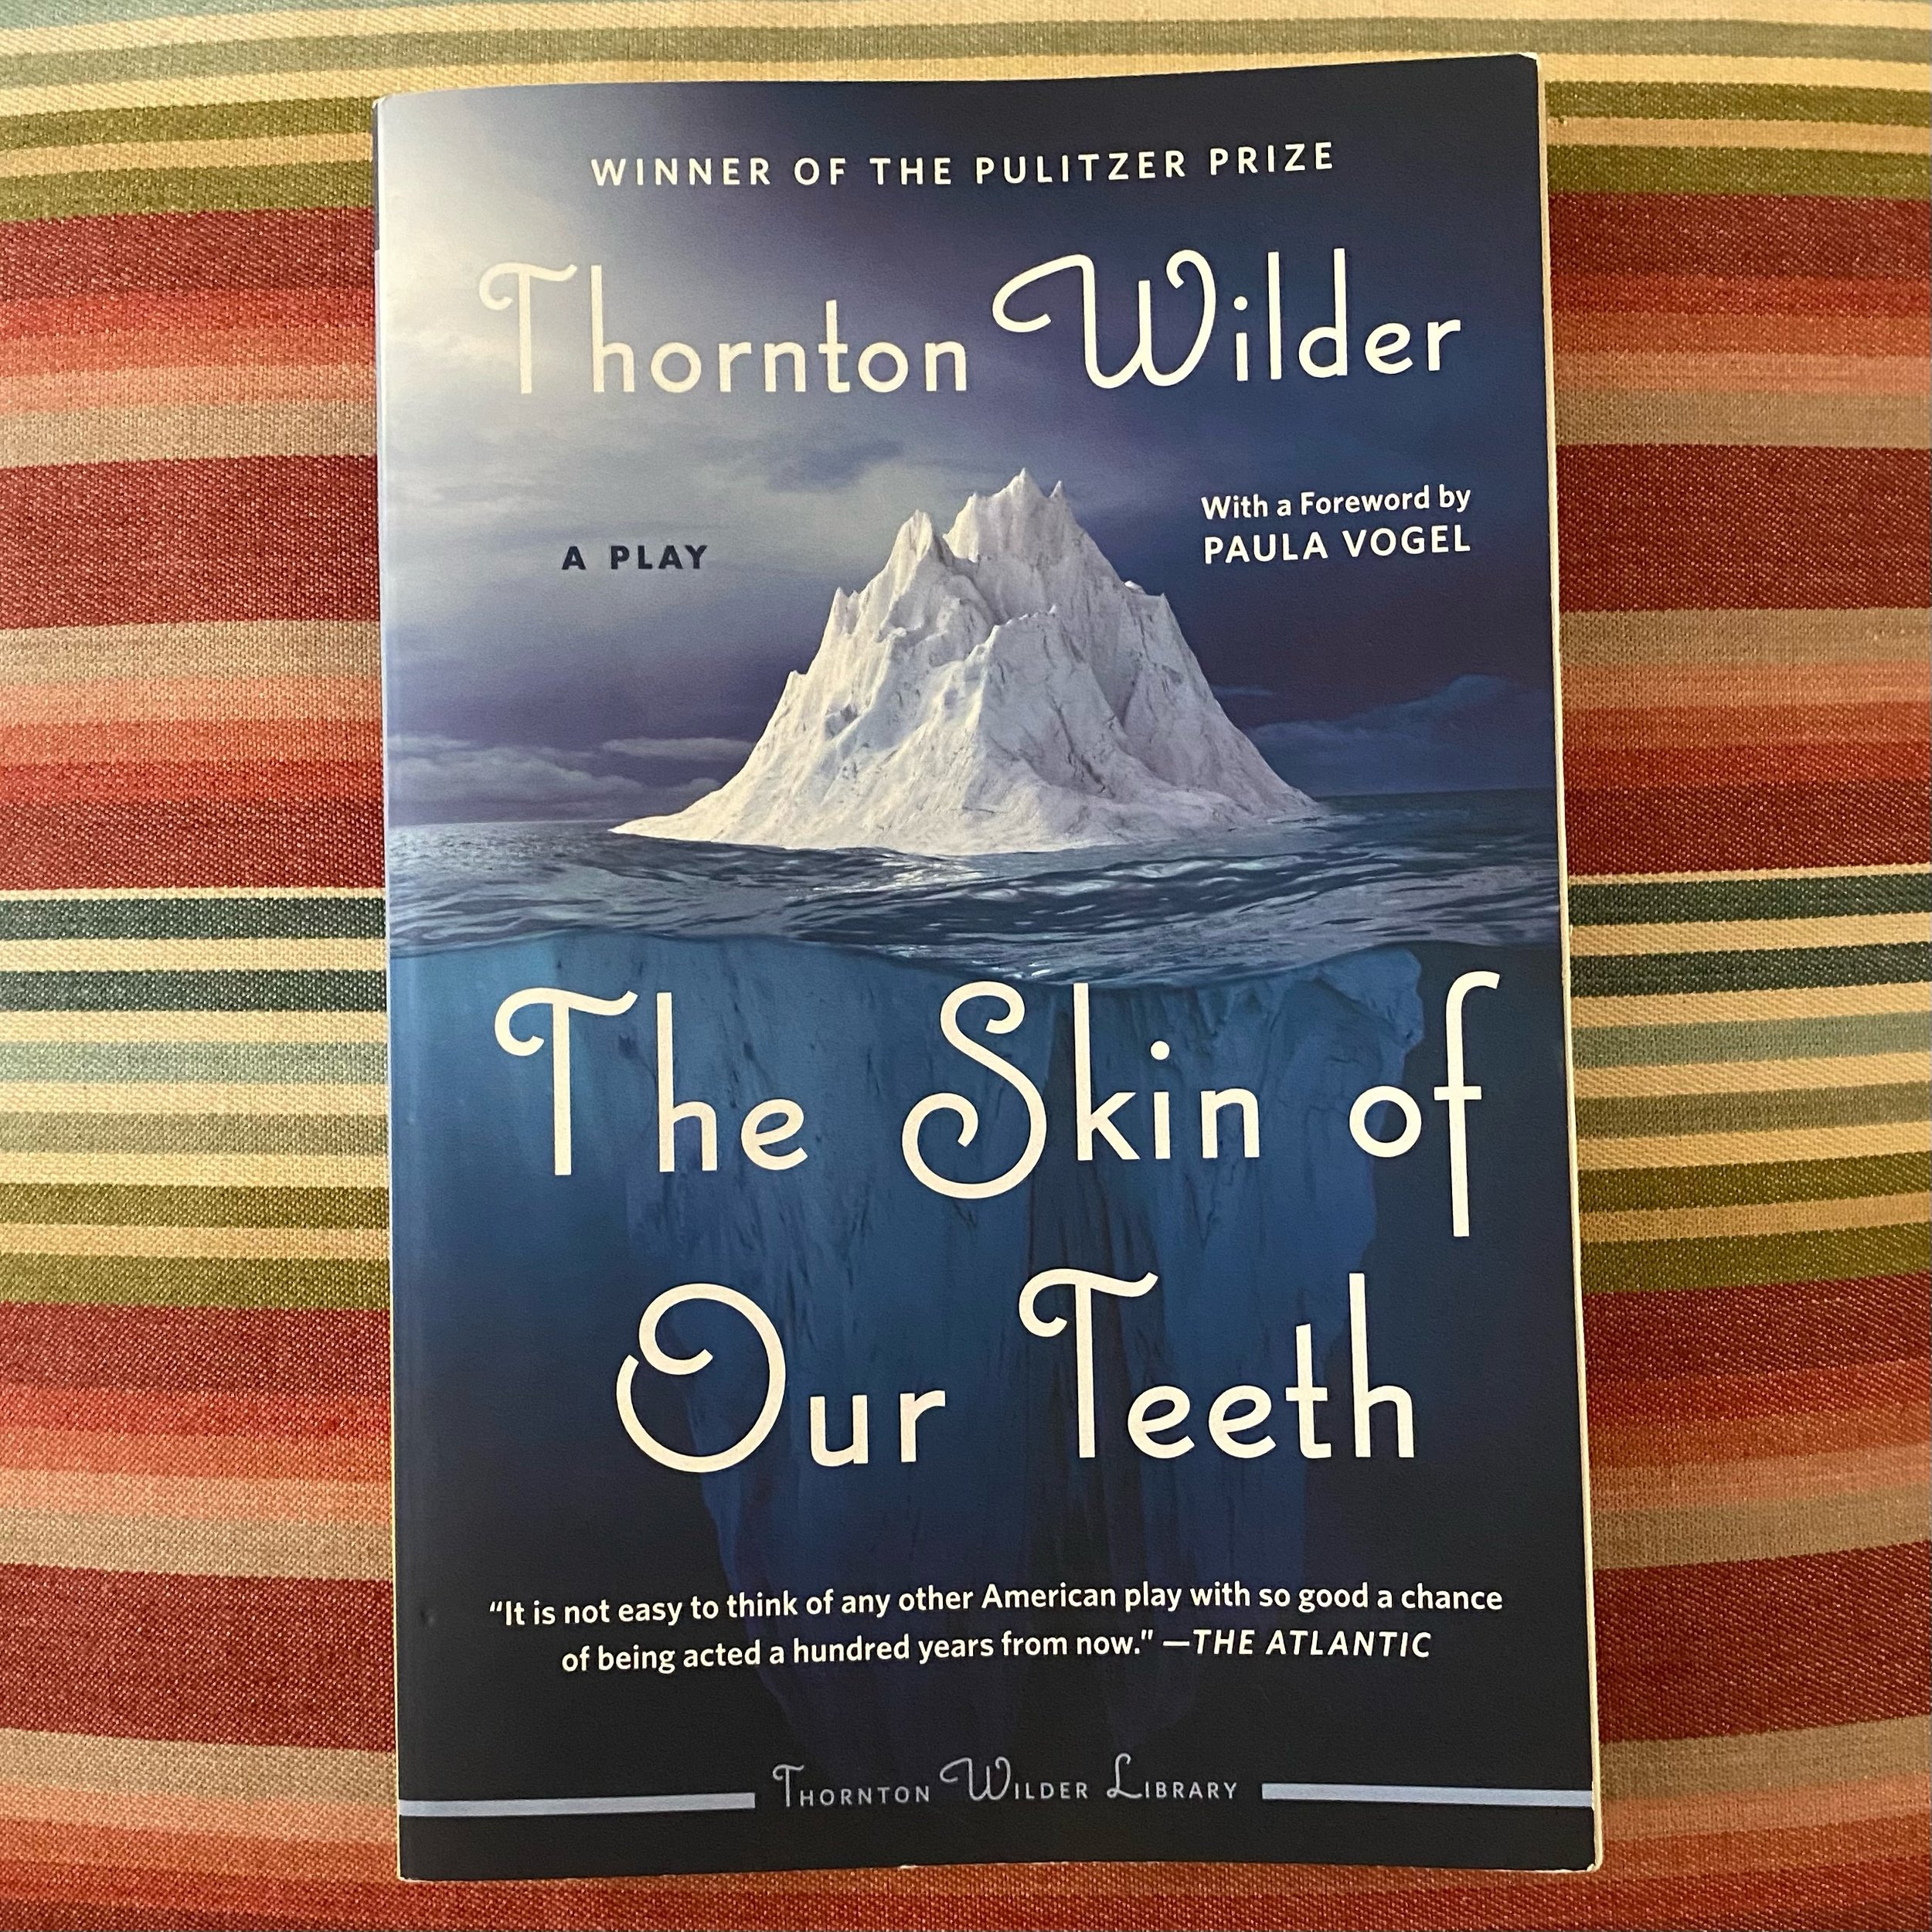  “For an American dramatist, all roads lead back to Thornton Wilder…THE SKIN OF OUR TEETH was a remarkable gift to an America entrenched in catastrophe, a tribute to the trait of human endurance.”  — – PAULA VOGEL, FOREWORD, THE SKIN OF OUR TEETH. 